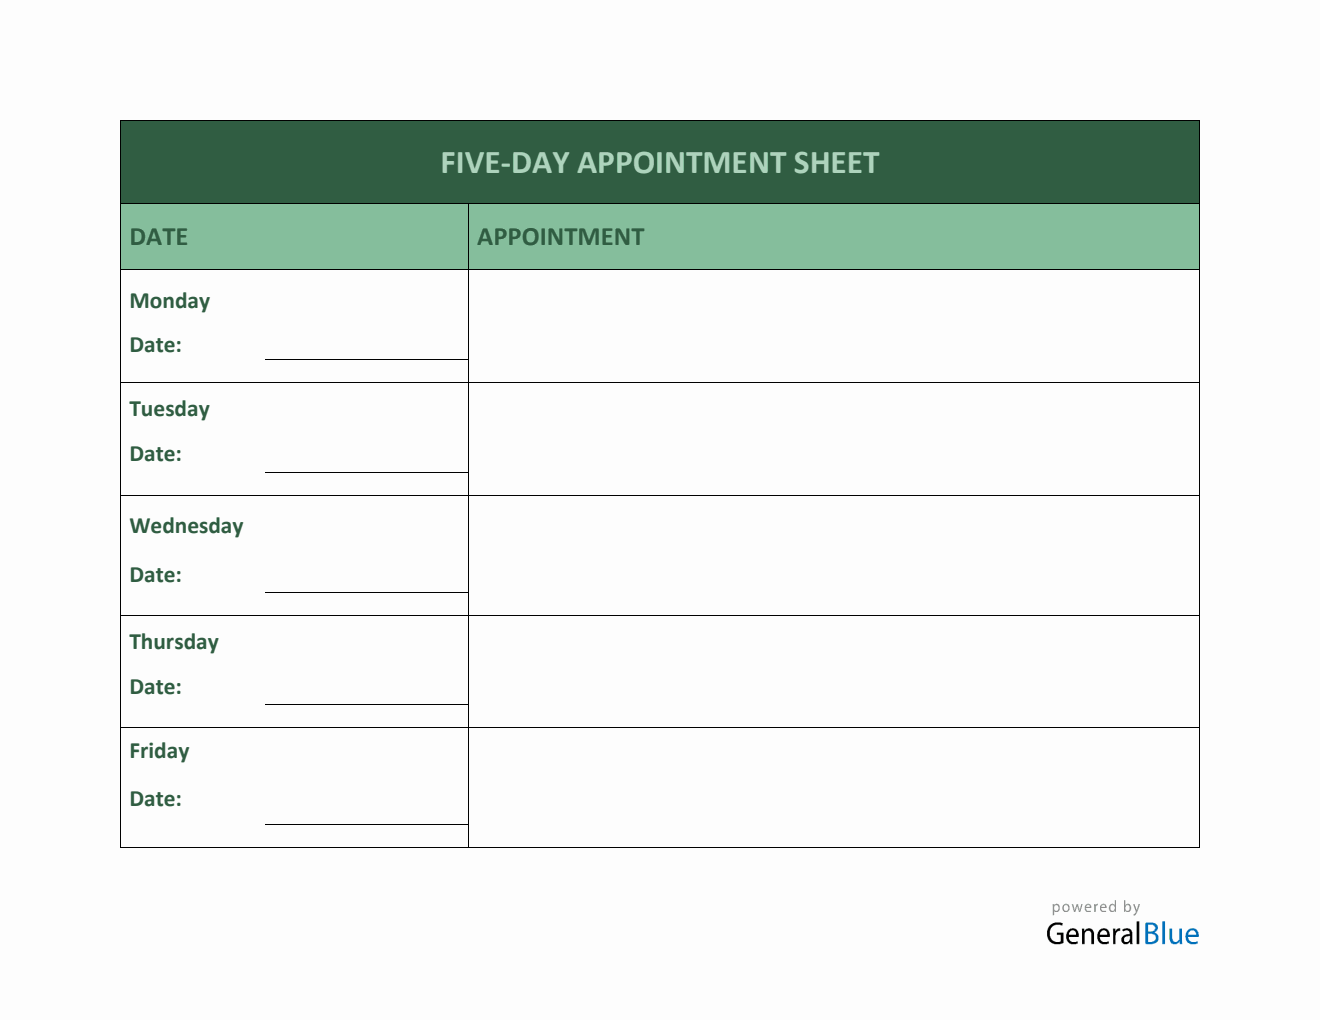 Five-Day Appointment Sheet Template in PDF (Printable)